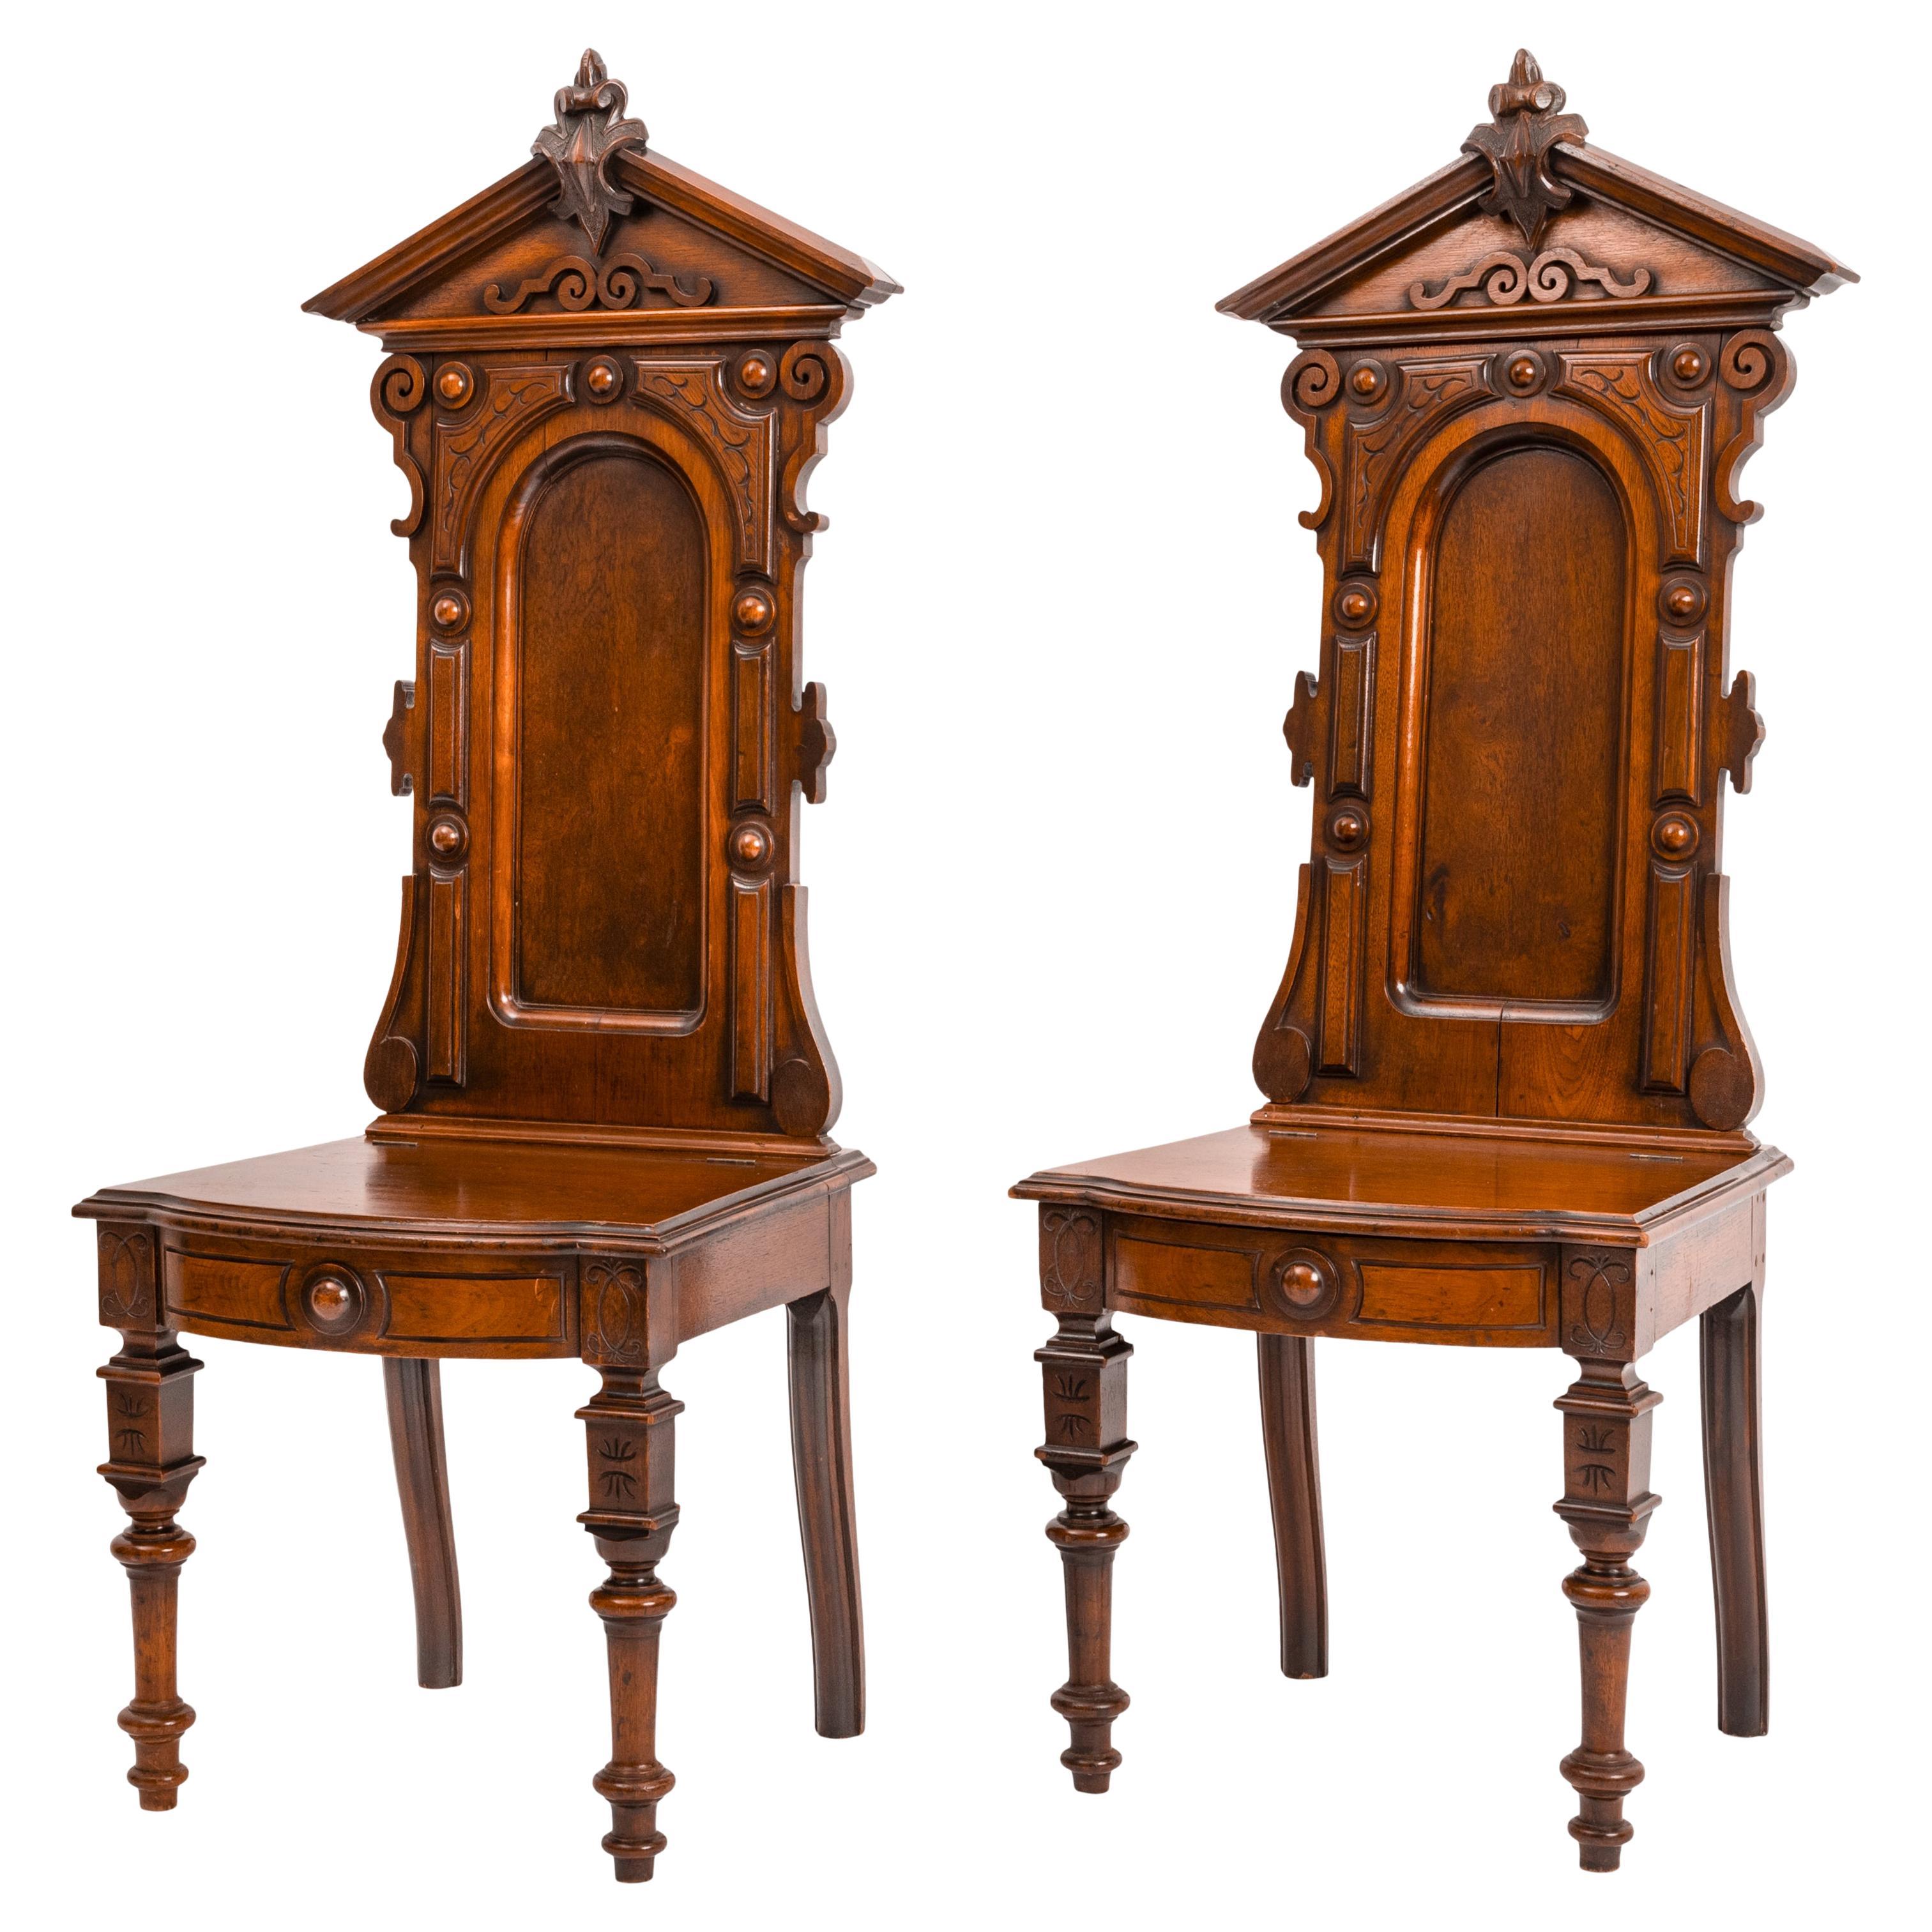 Antique Pair of American High Back Walnut Renaissance Revival Carved Hall Chairs